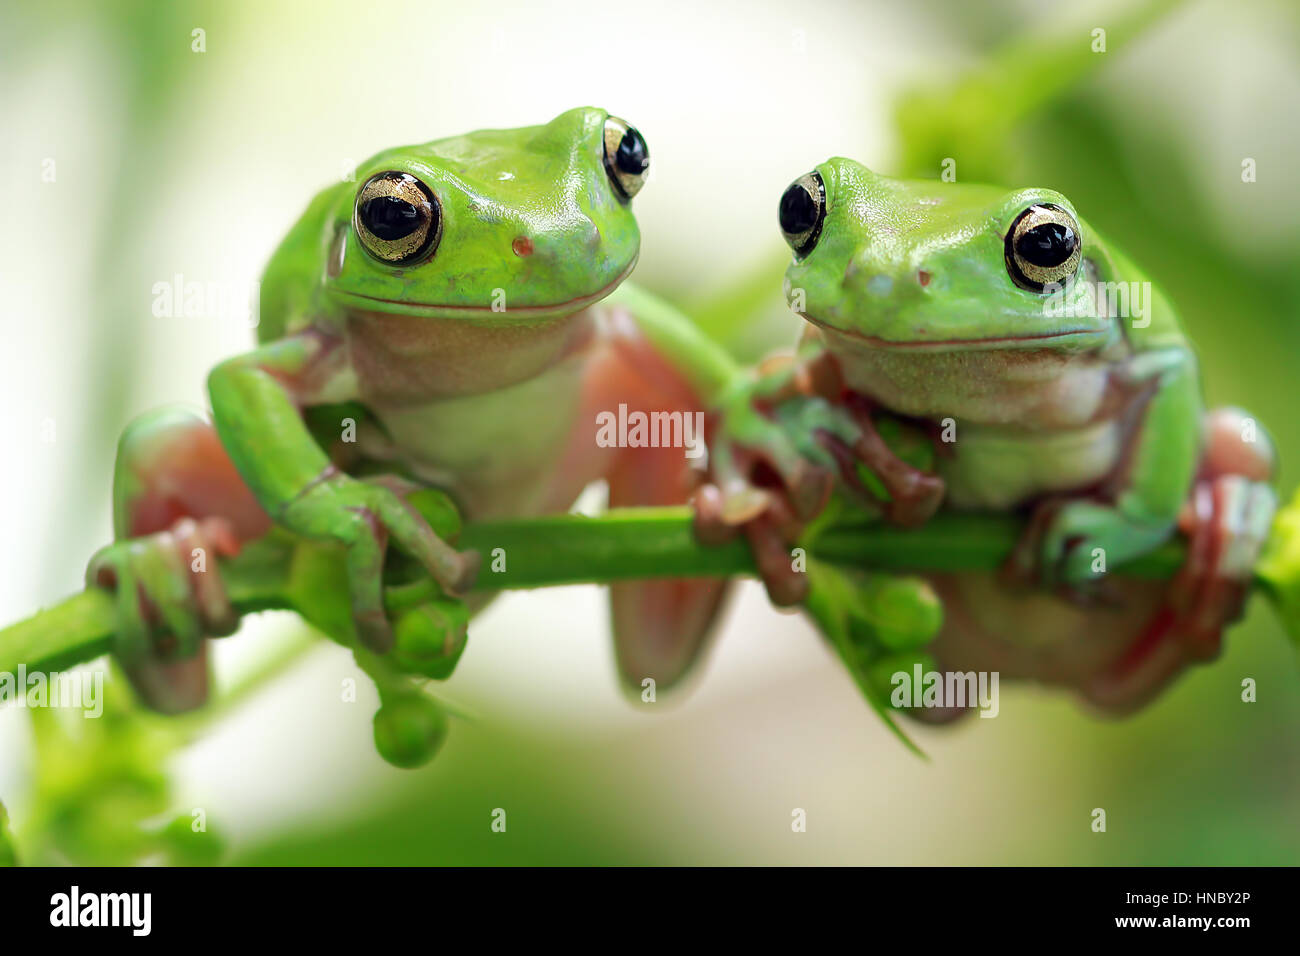 Two dumpy tree frogs on a plant, Indonesia Stock Photo